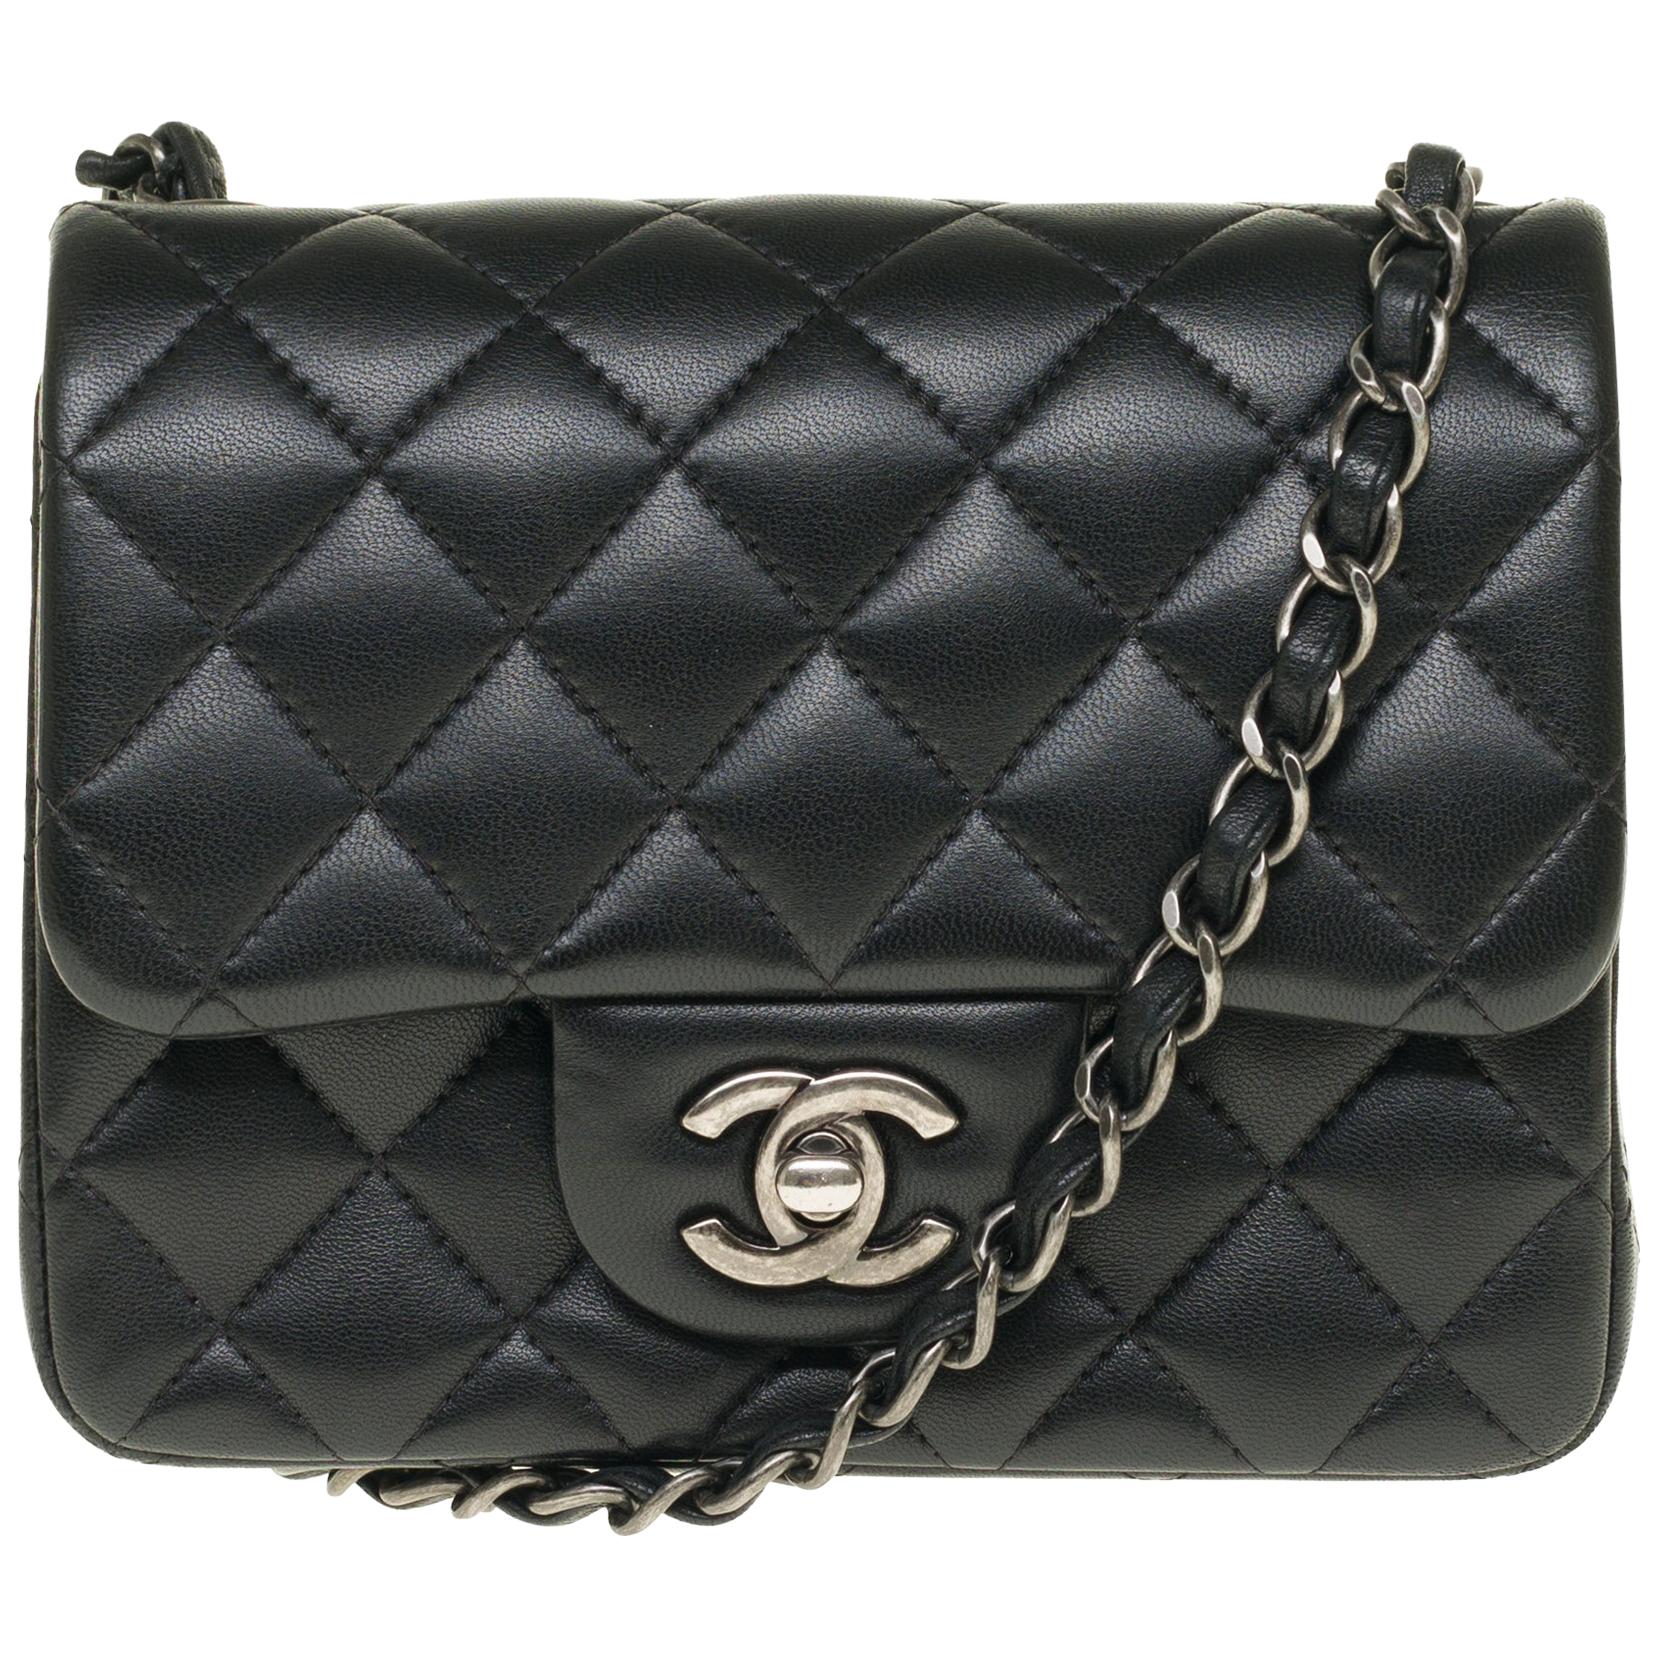 Chanel Mini square handbag in black quilted leather, Silver hardware